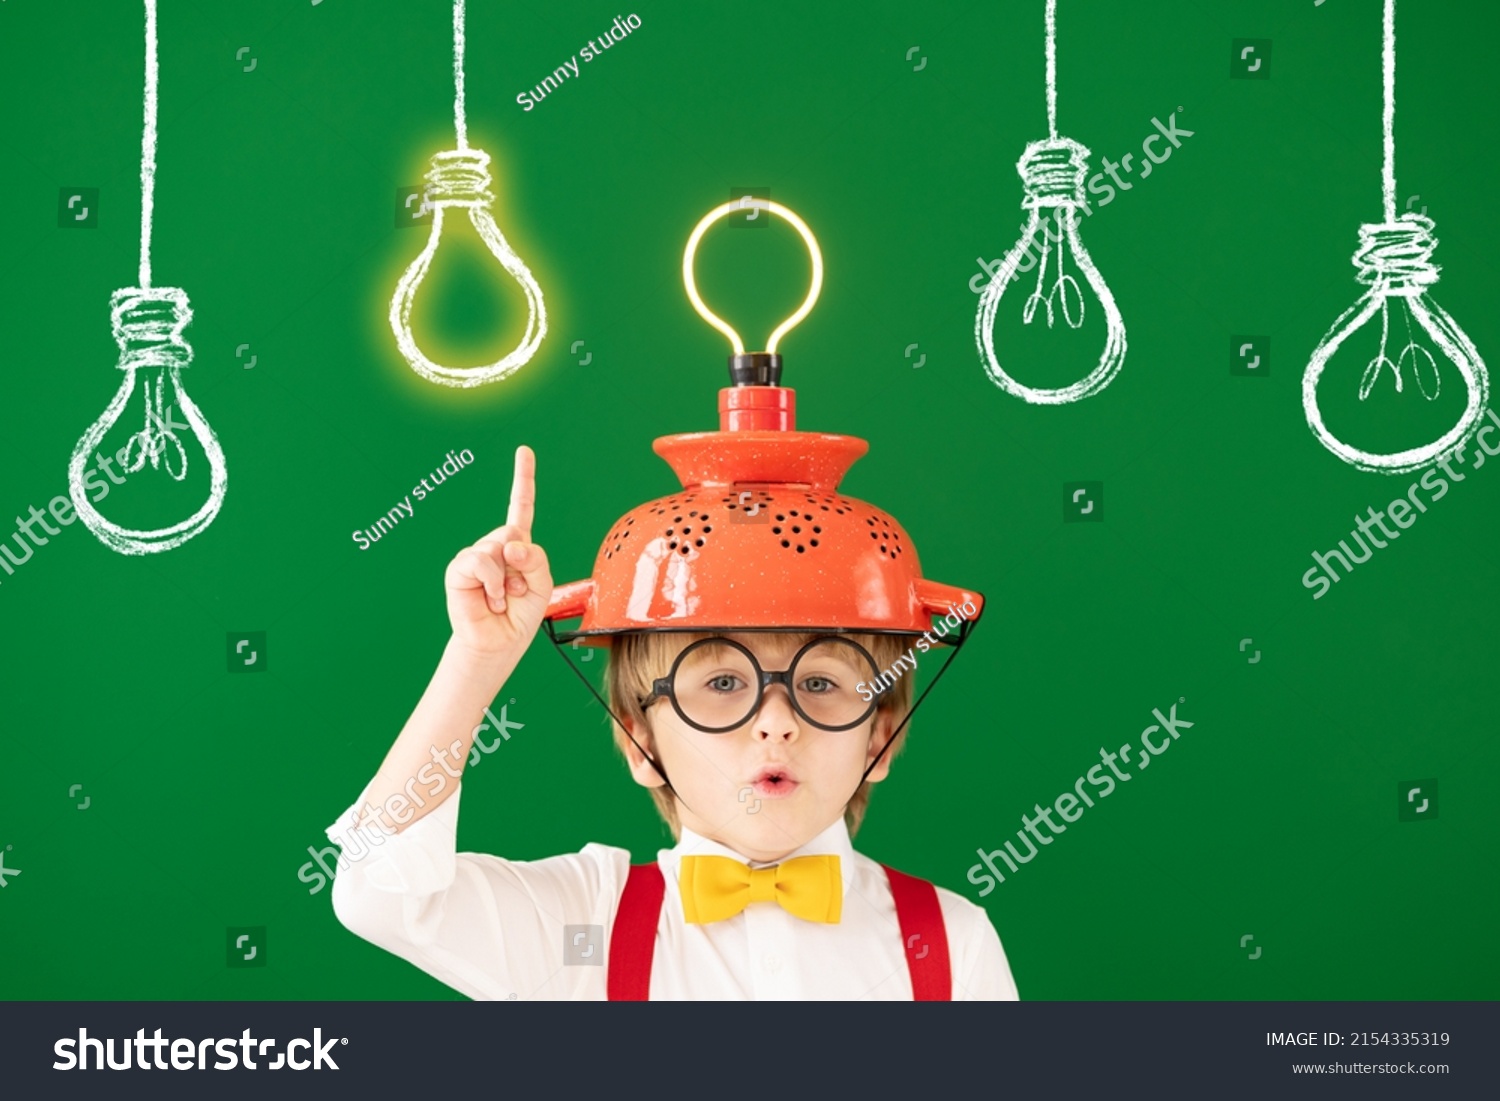 Smart child in the class against blackboard. Funny kid with lightbulb at school. Education, start up and business idea concept #2154335319